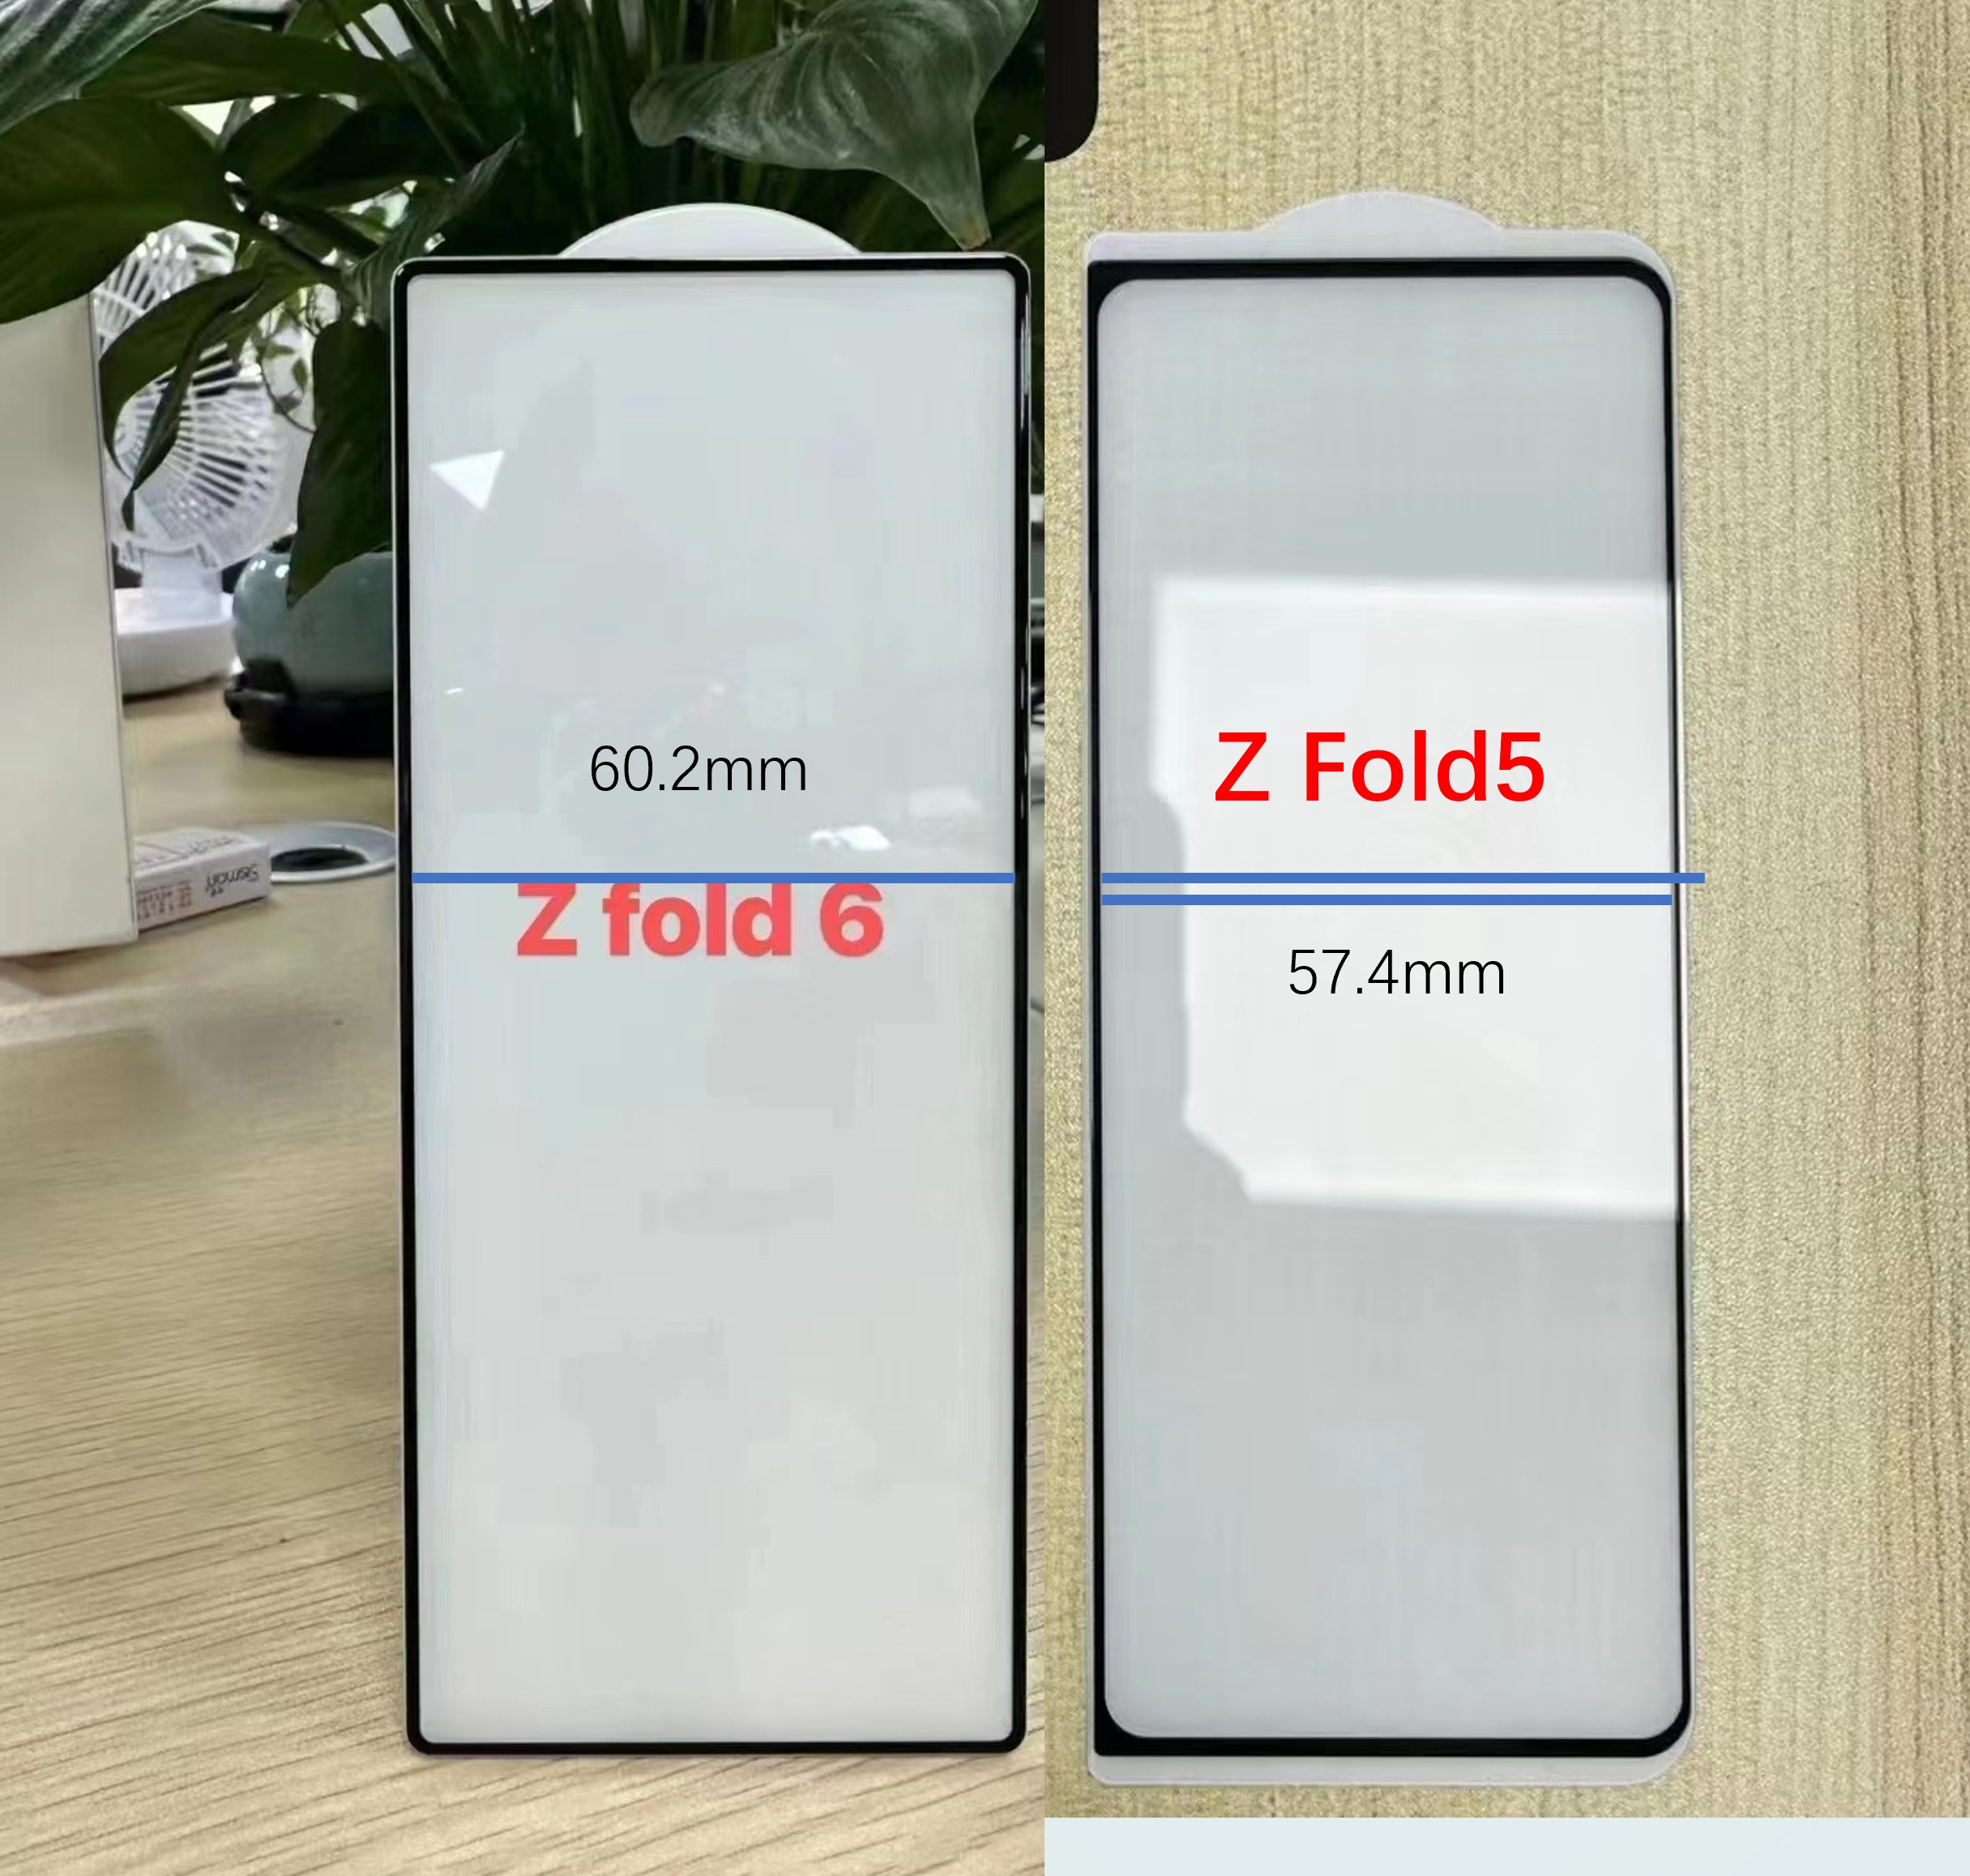 An alleged composite image of a Galaxy Z Fold 6 and Galaxy Z Fold 5, both closed